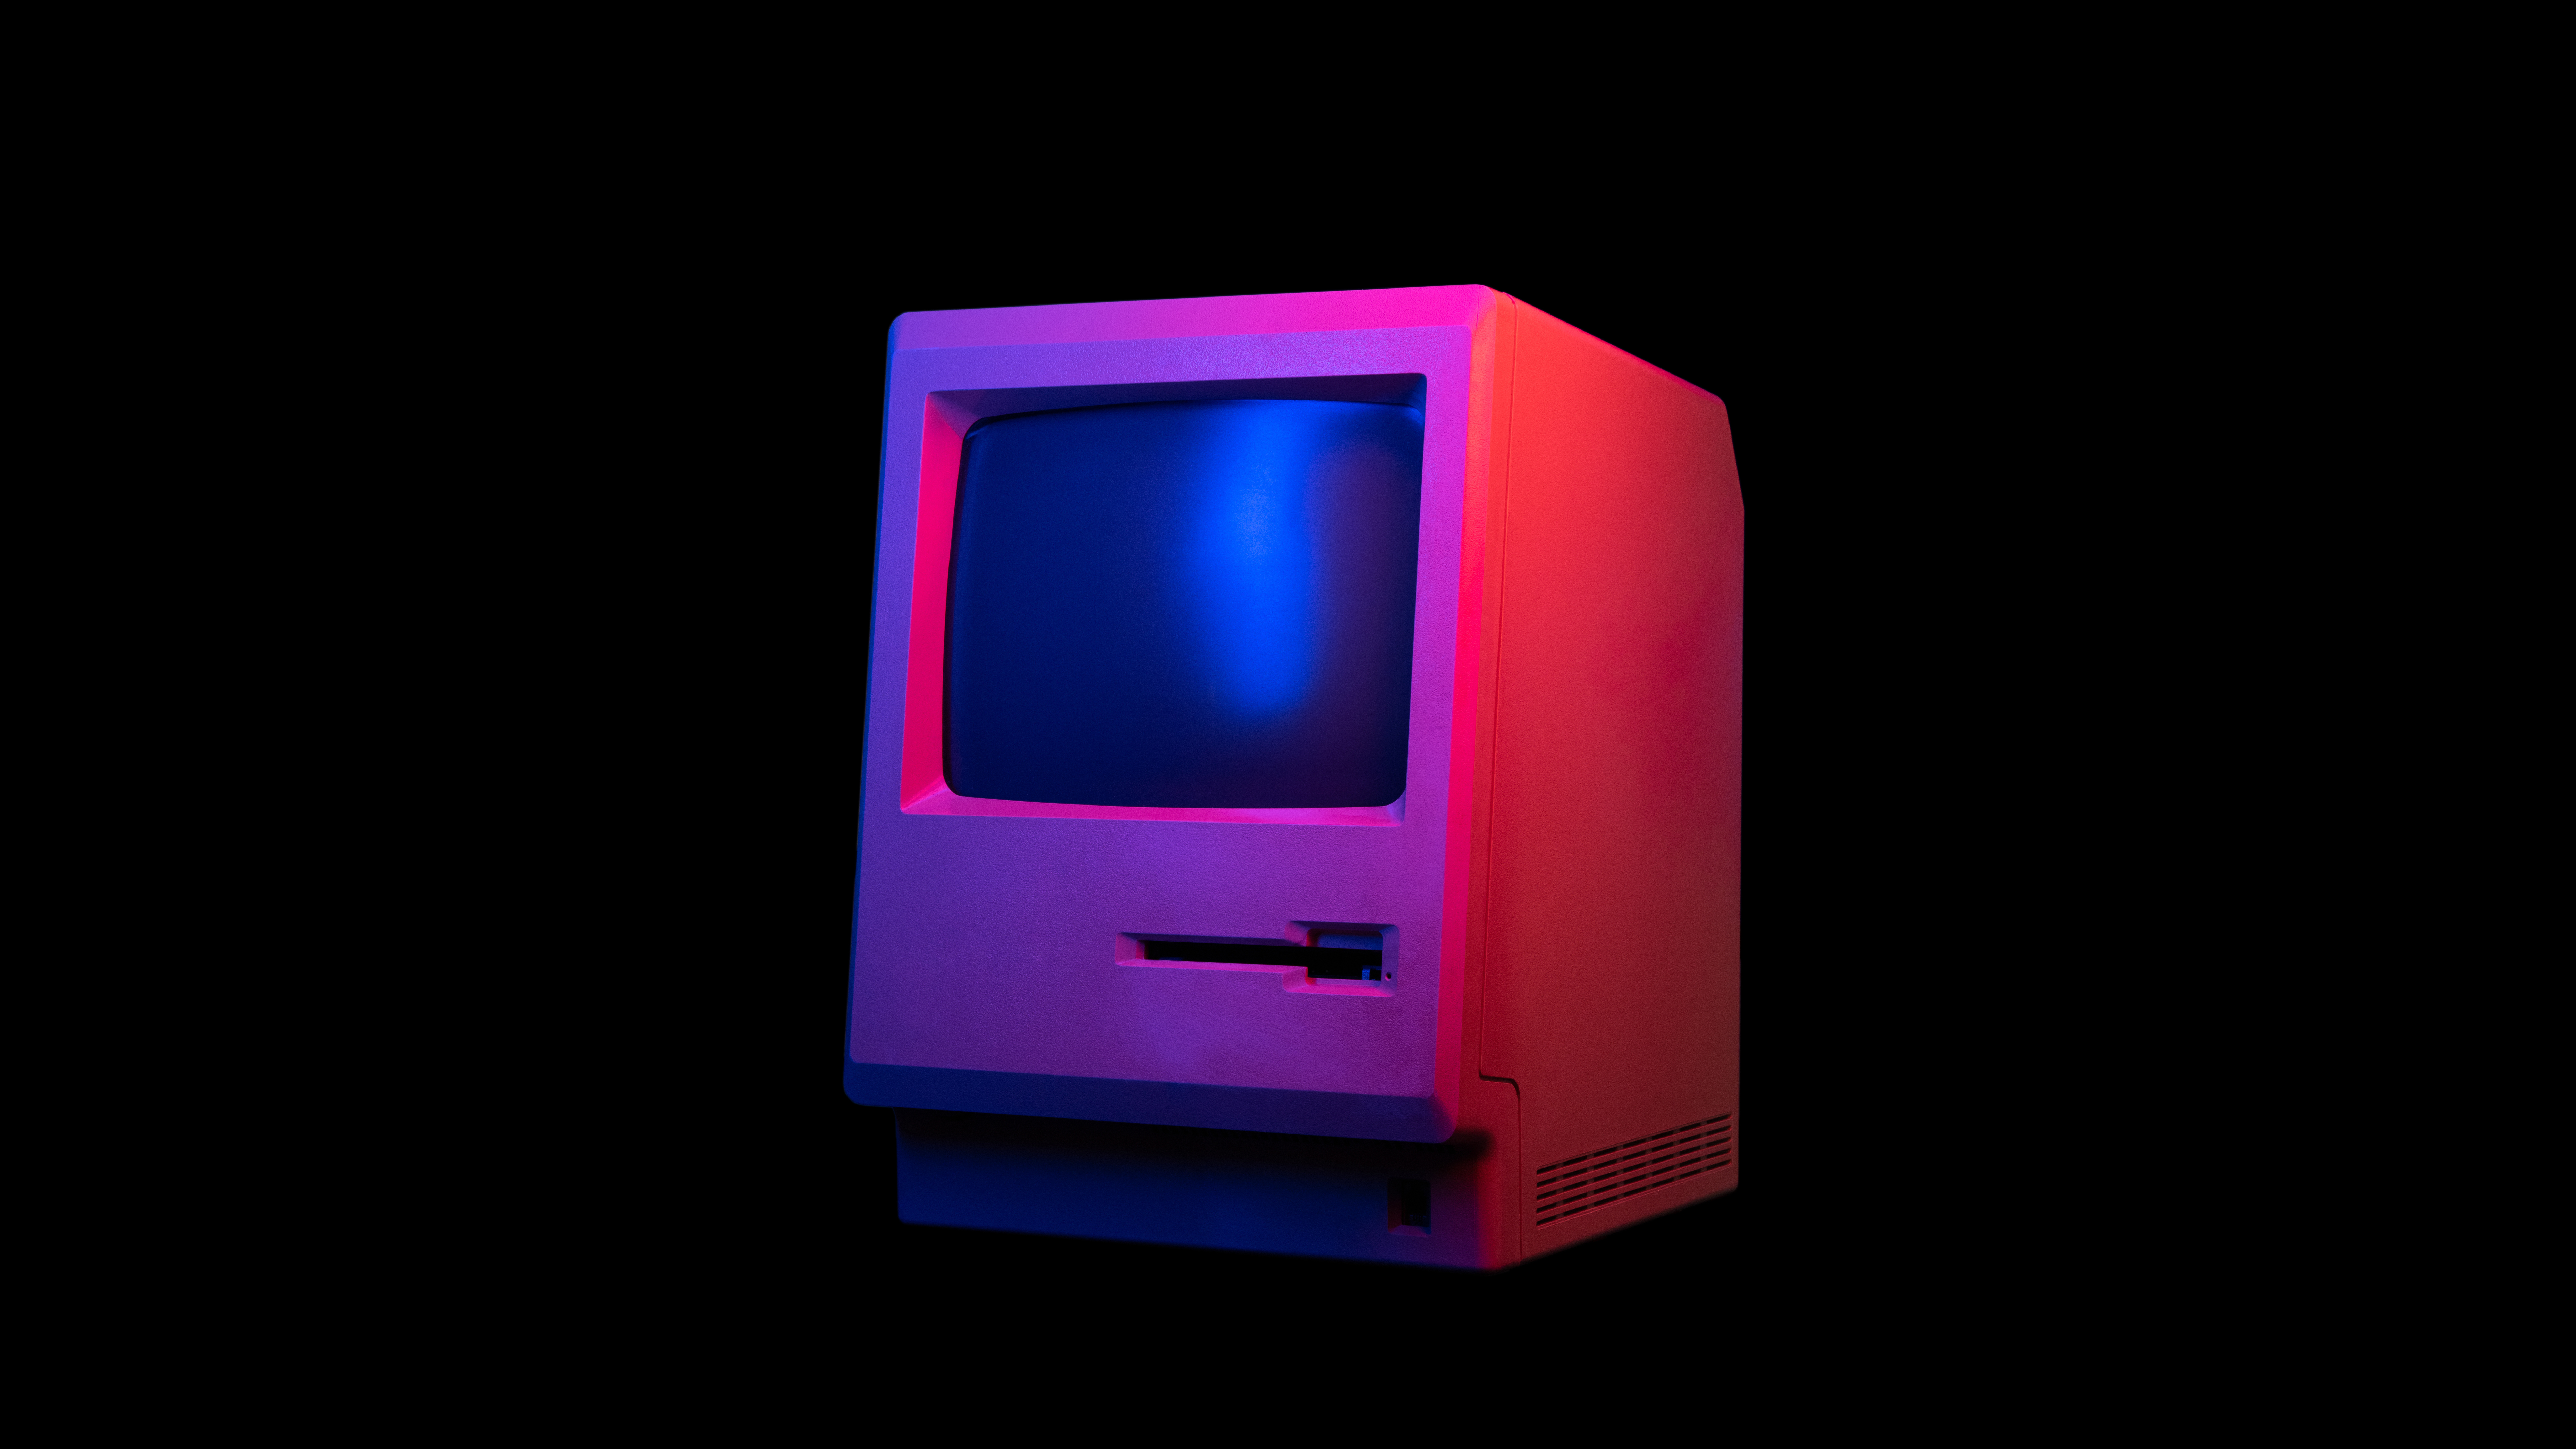 Retro wave 80s computer all-in-one illuminated by neon light isolated on black